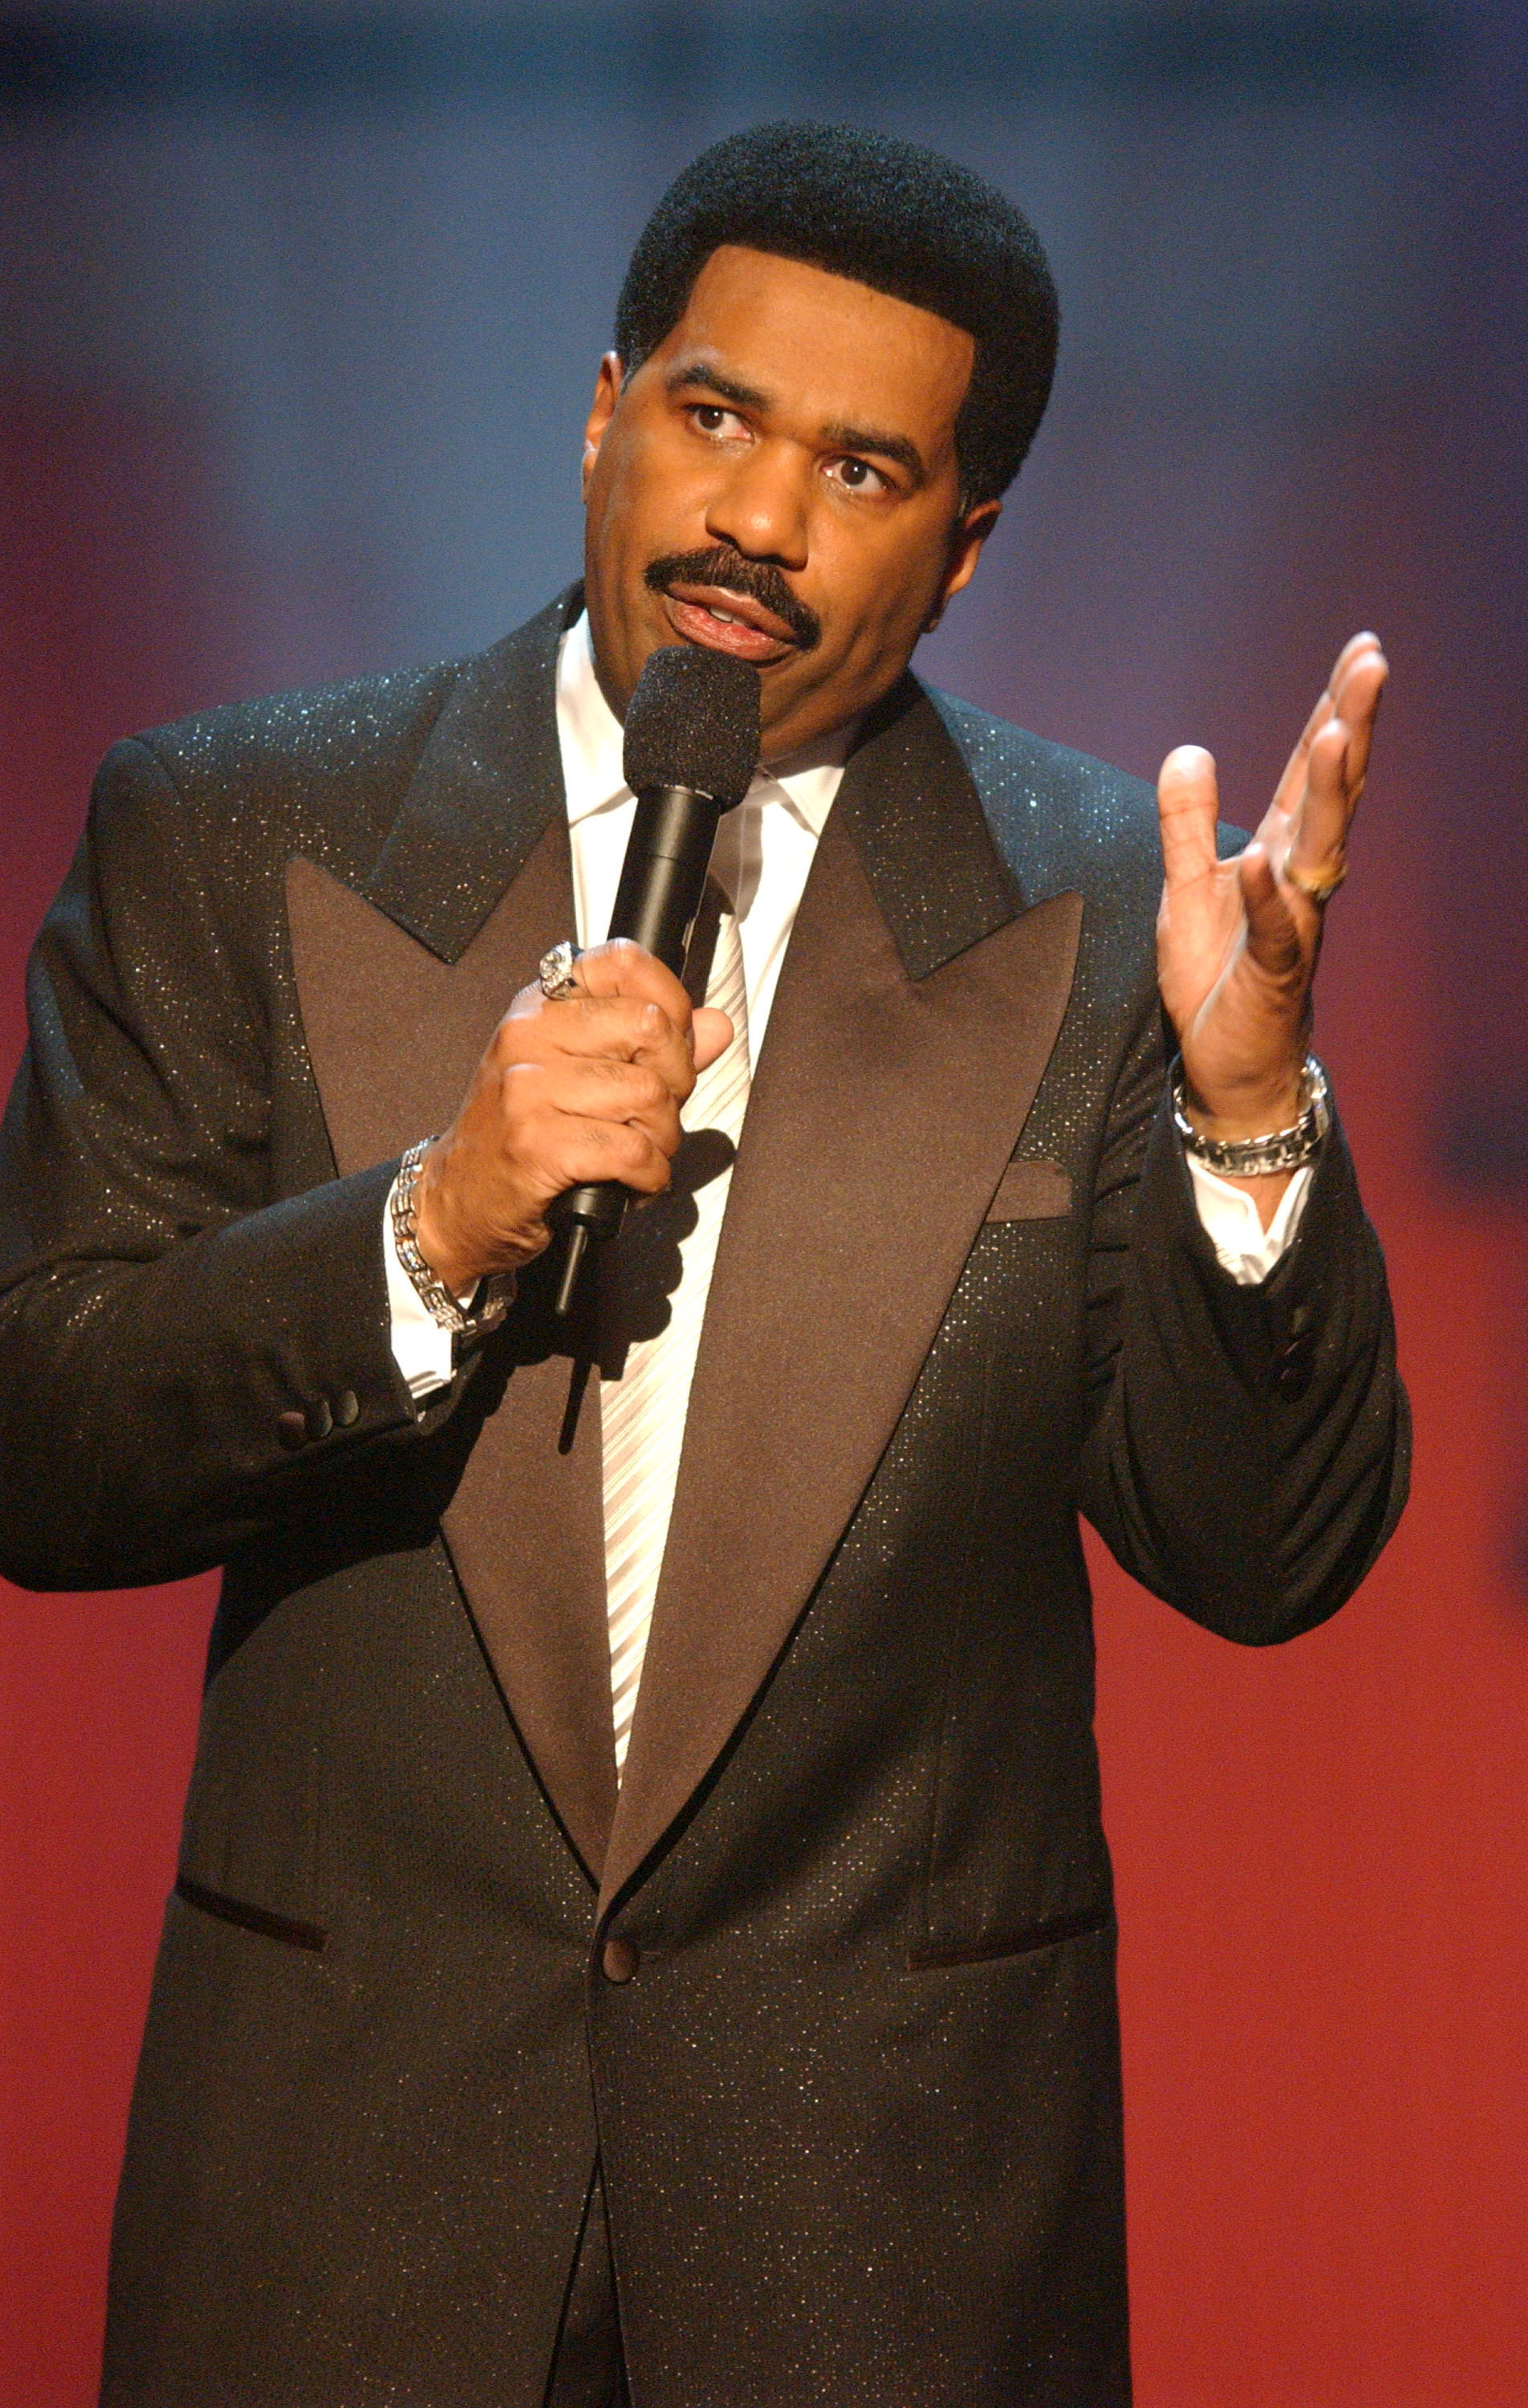 Steve Harvey performs at BET's 2nd Annual Celebration of Gospel in Los Angeles, California on January 26, 2002 | Source: Getty Images